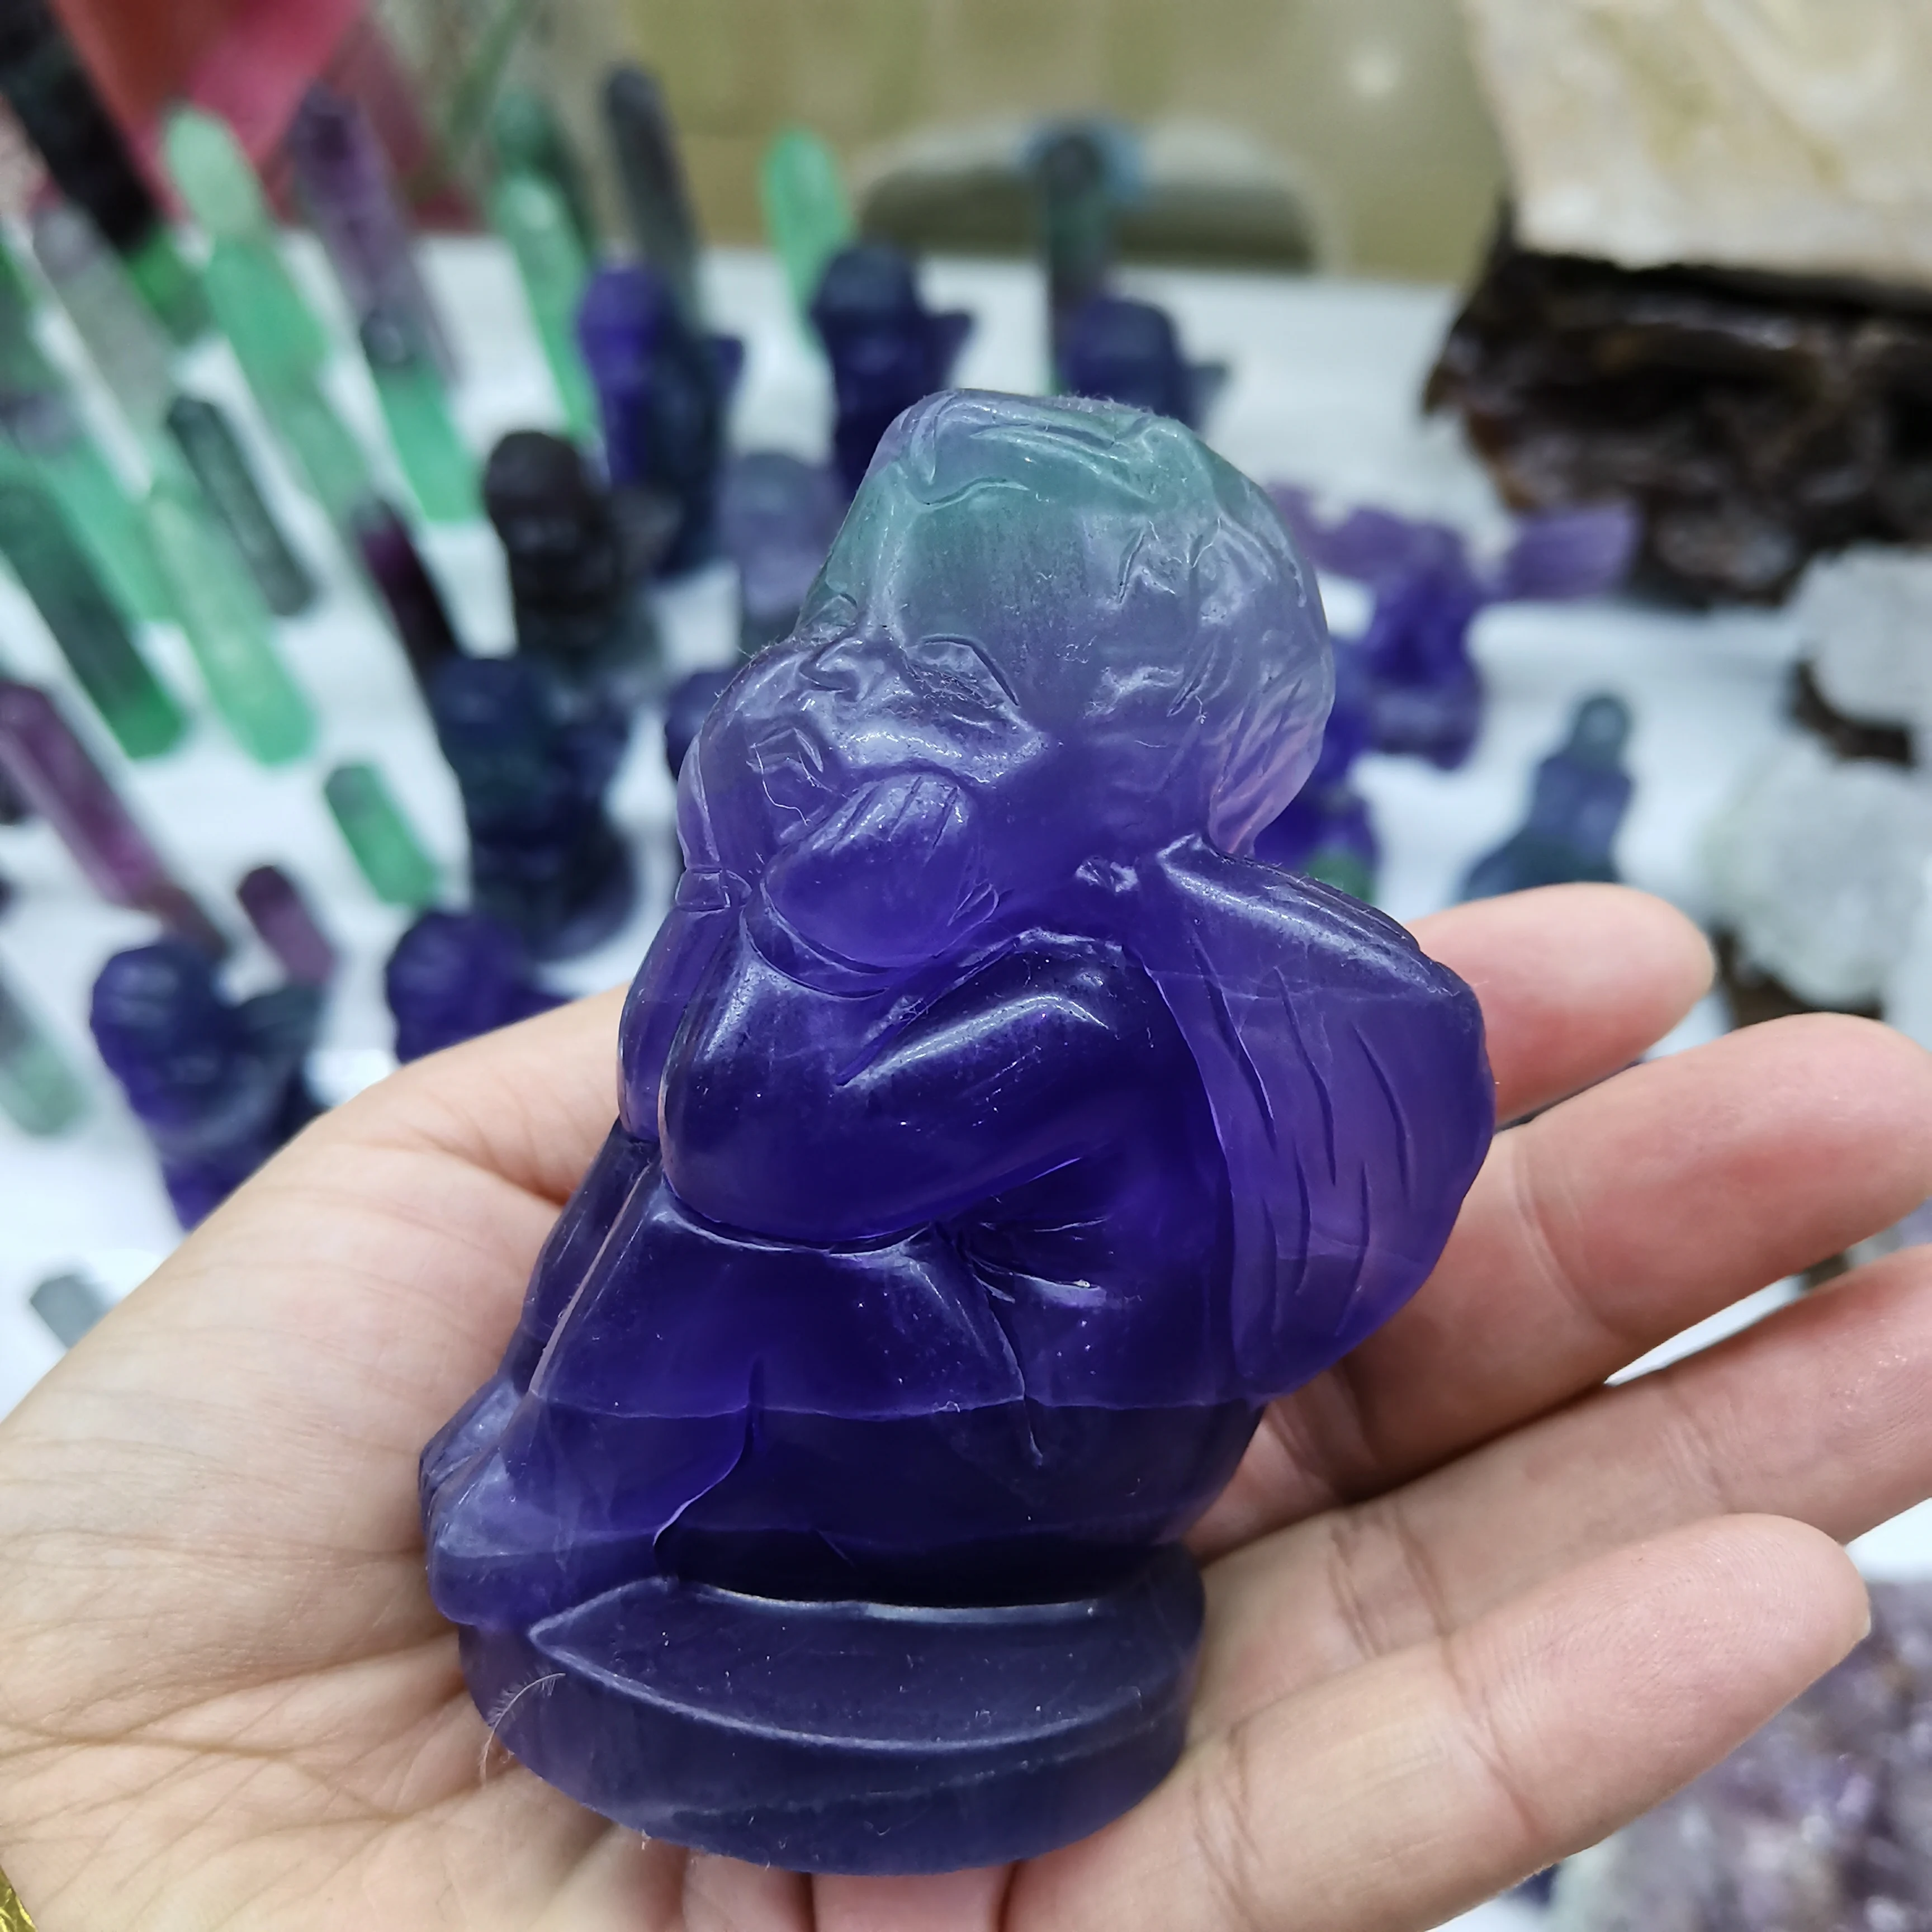 

90mm Natural Crystal Carved Colorful Fluorite Little boy angel Figurines Collection Crafts Gifts Small Ornaments Decoration 1pcs